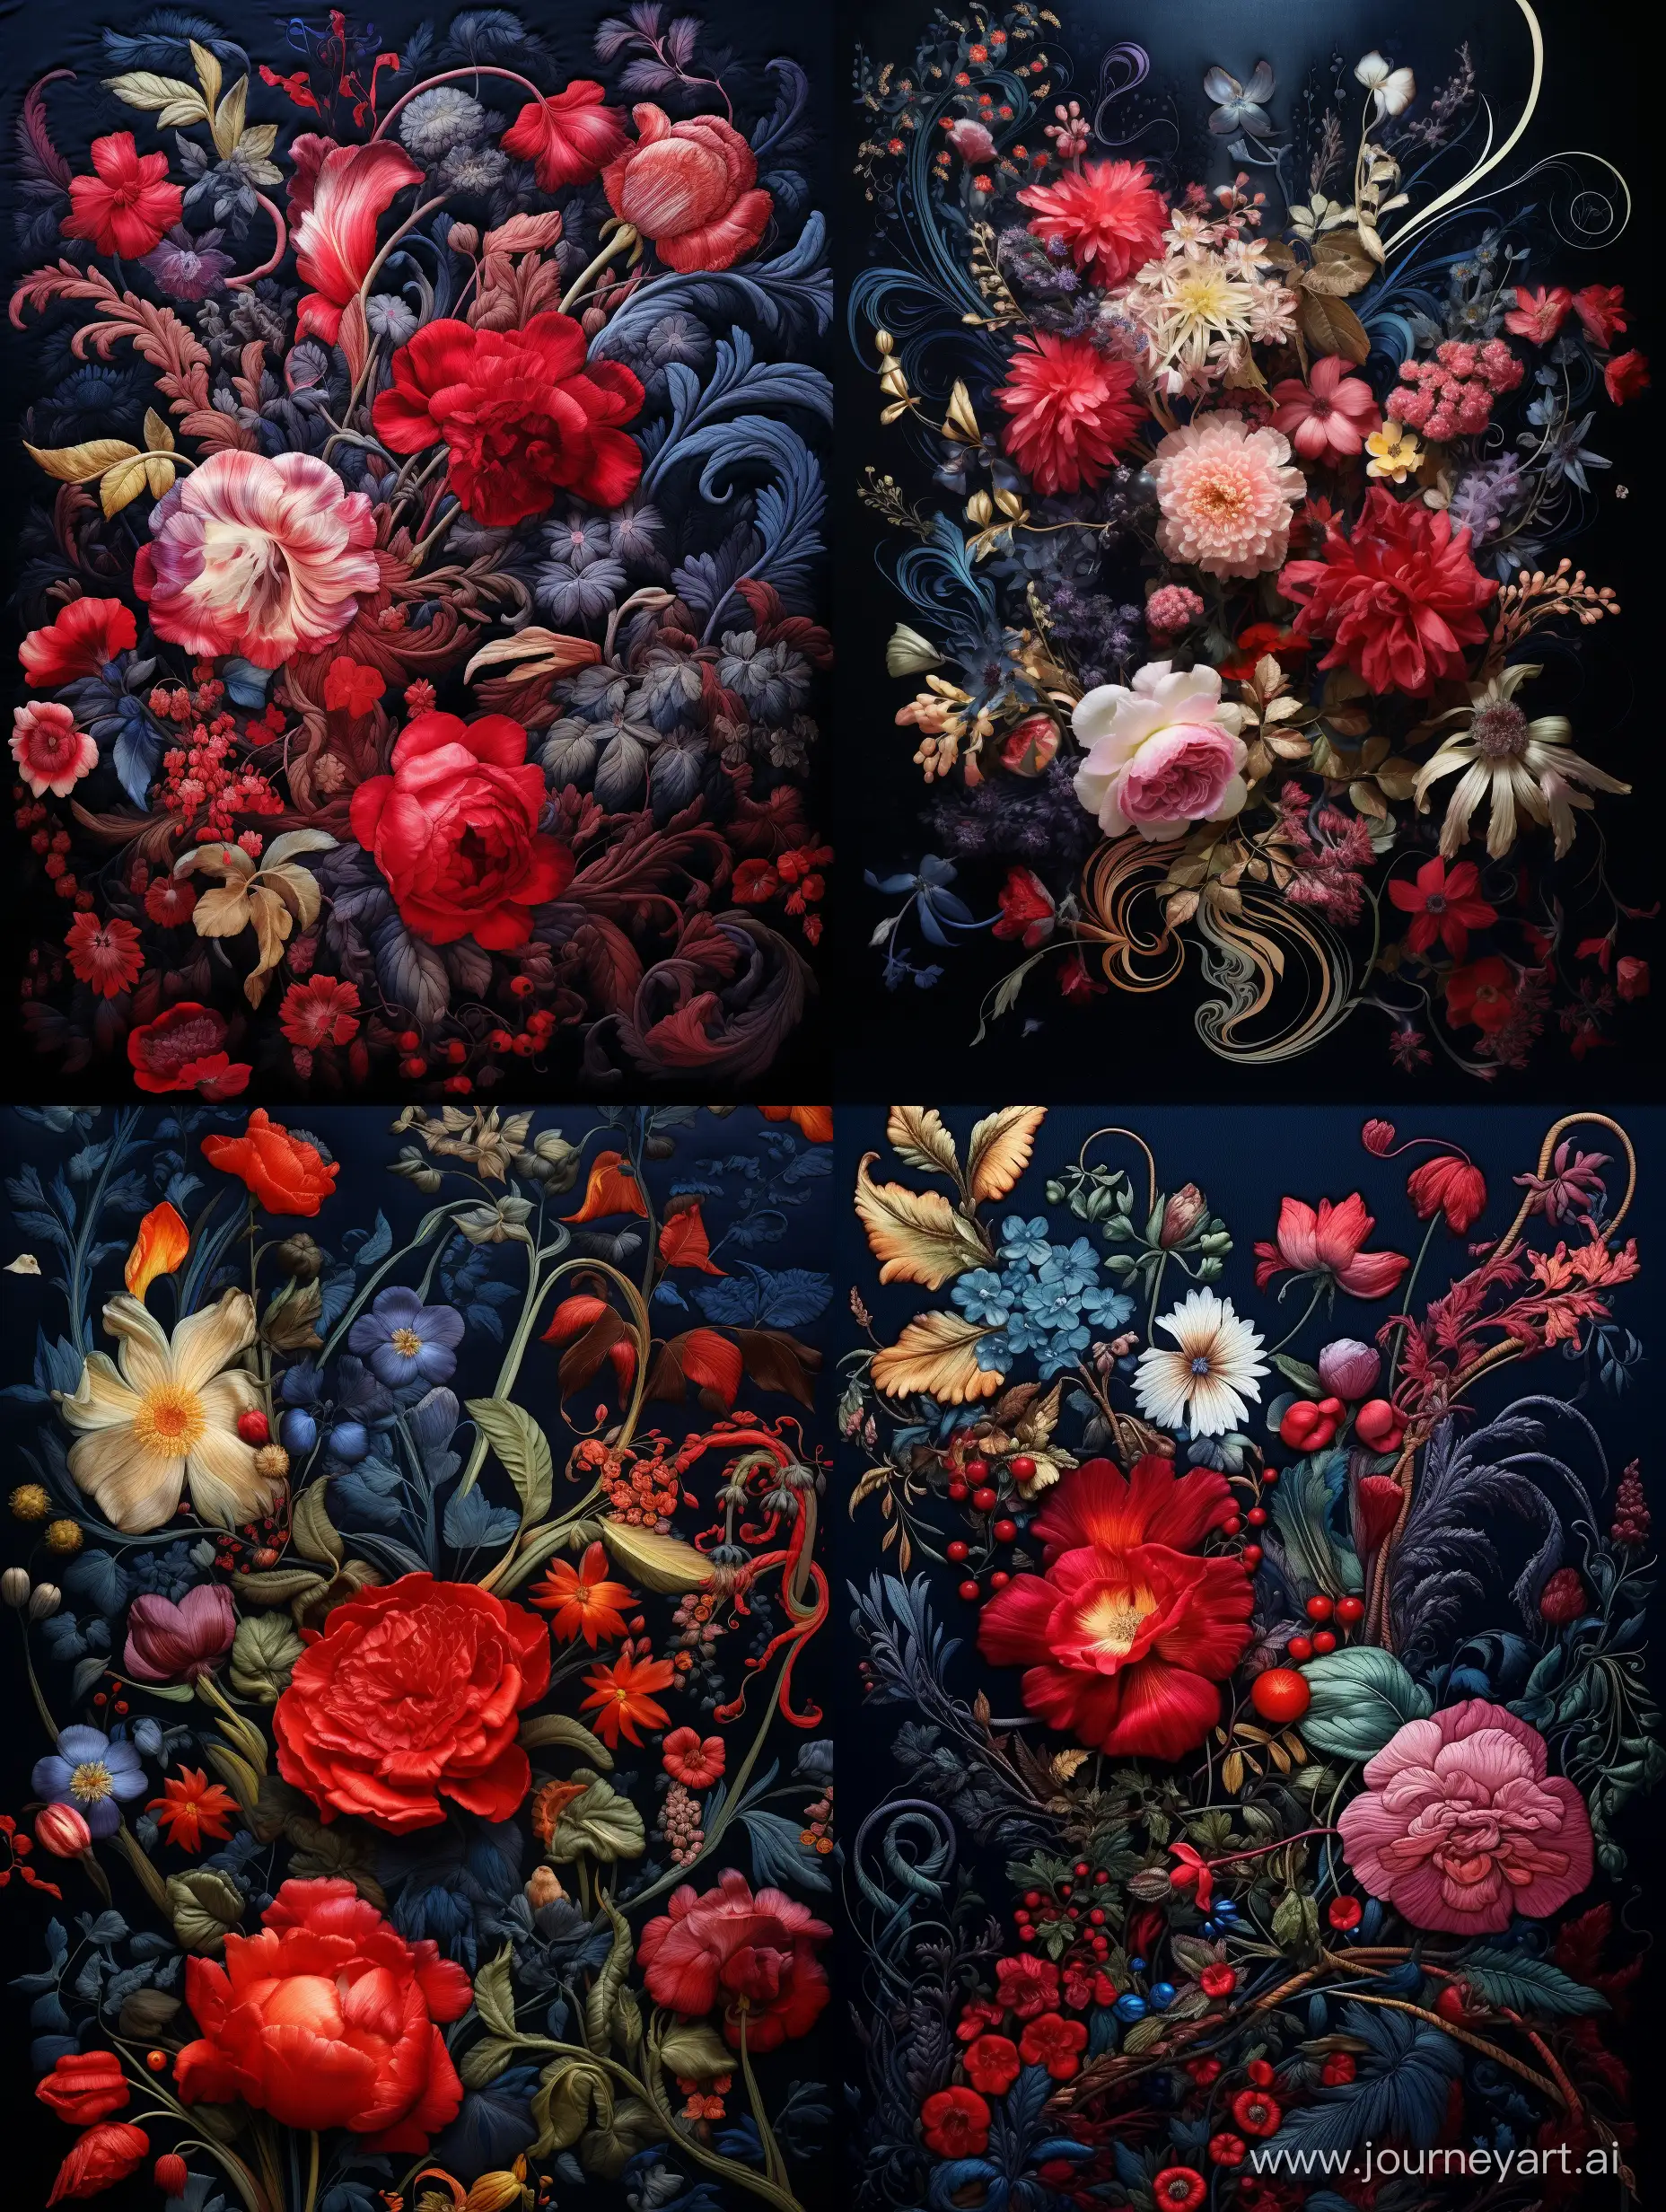 a painting of flowers floating in mid-air, in the style of baroque ornate and dramatic compositions, realistic color schemes, embroidery, caravaggesque chiaroscuro, detailed wildlife, dark blue and red, ornate embroidery